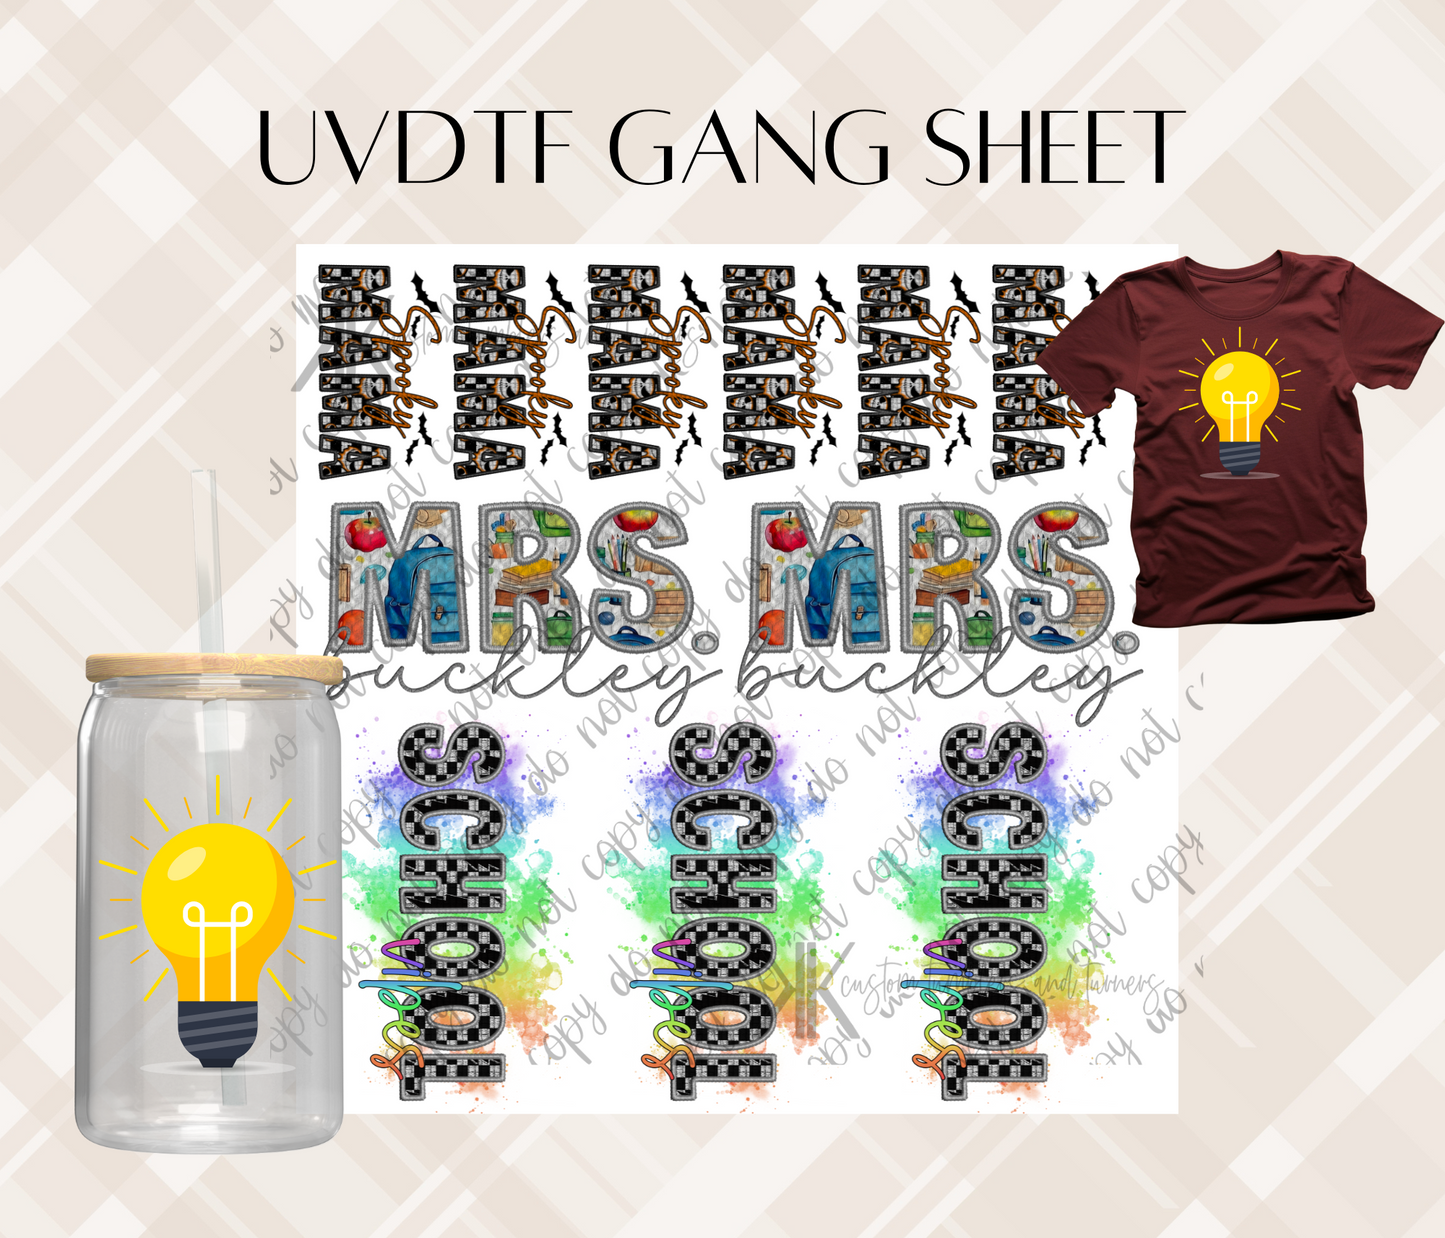 UVDTF GANG SHEETS (Build Your Own)